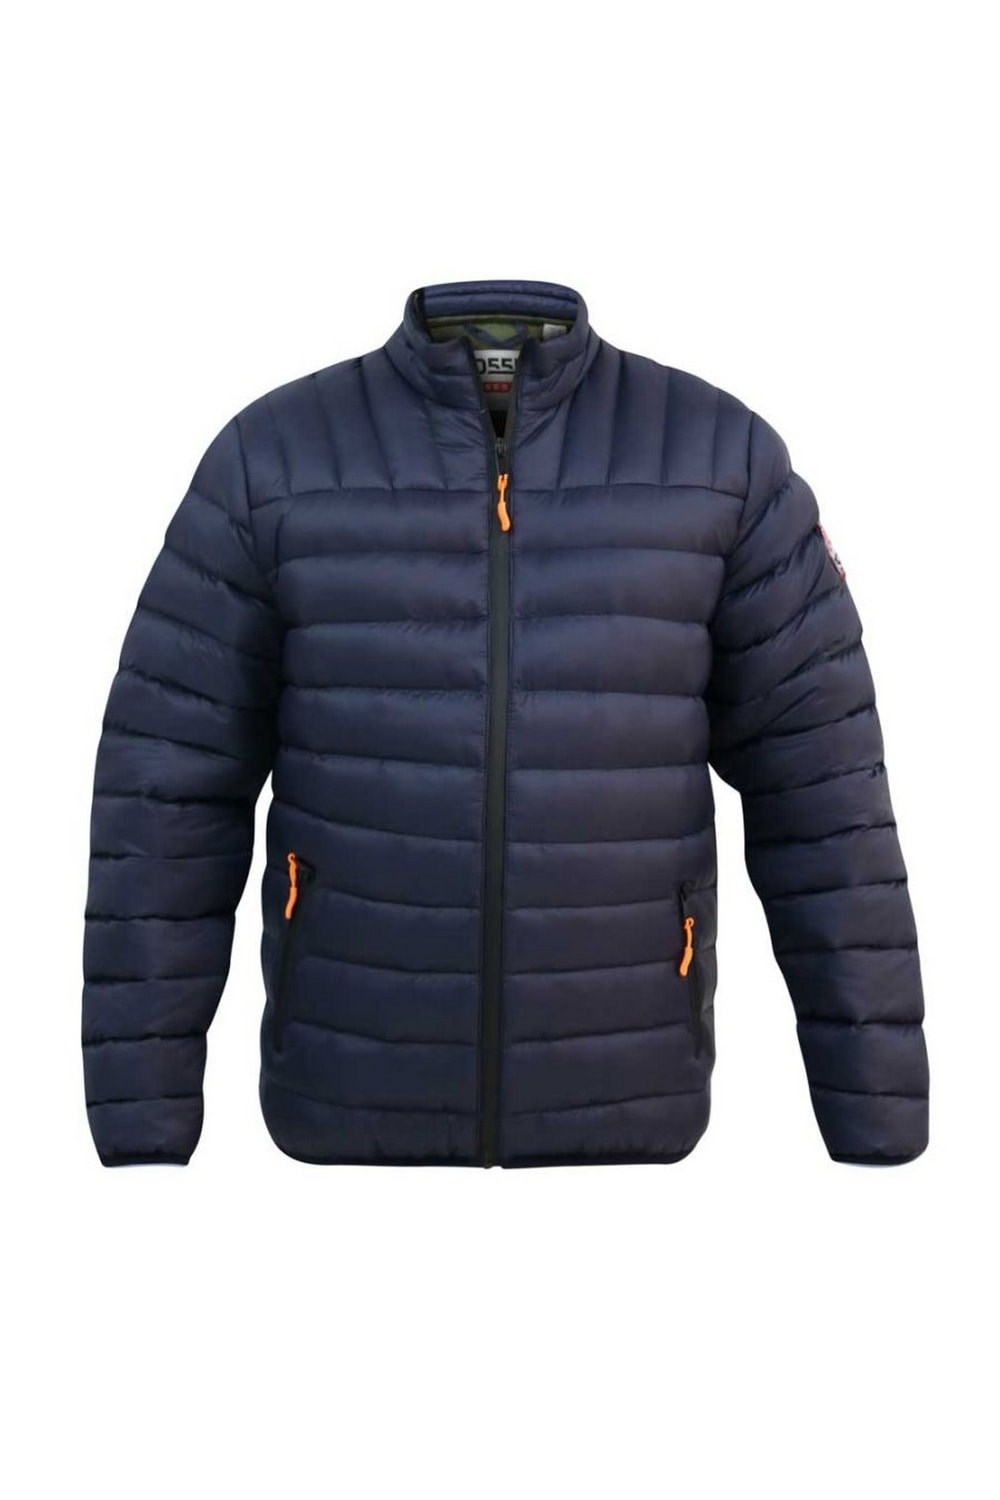 Limehouse 1 D555 Mens Padded Jacket -